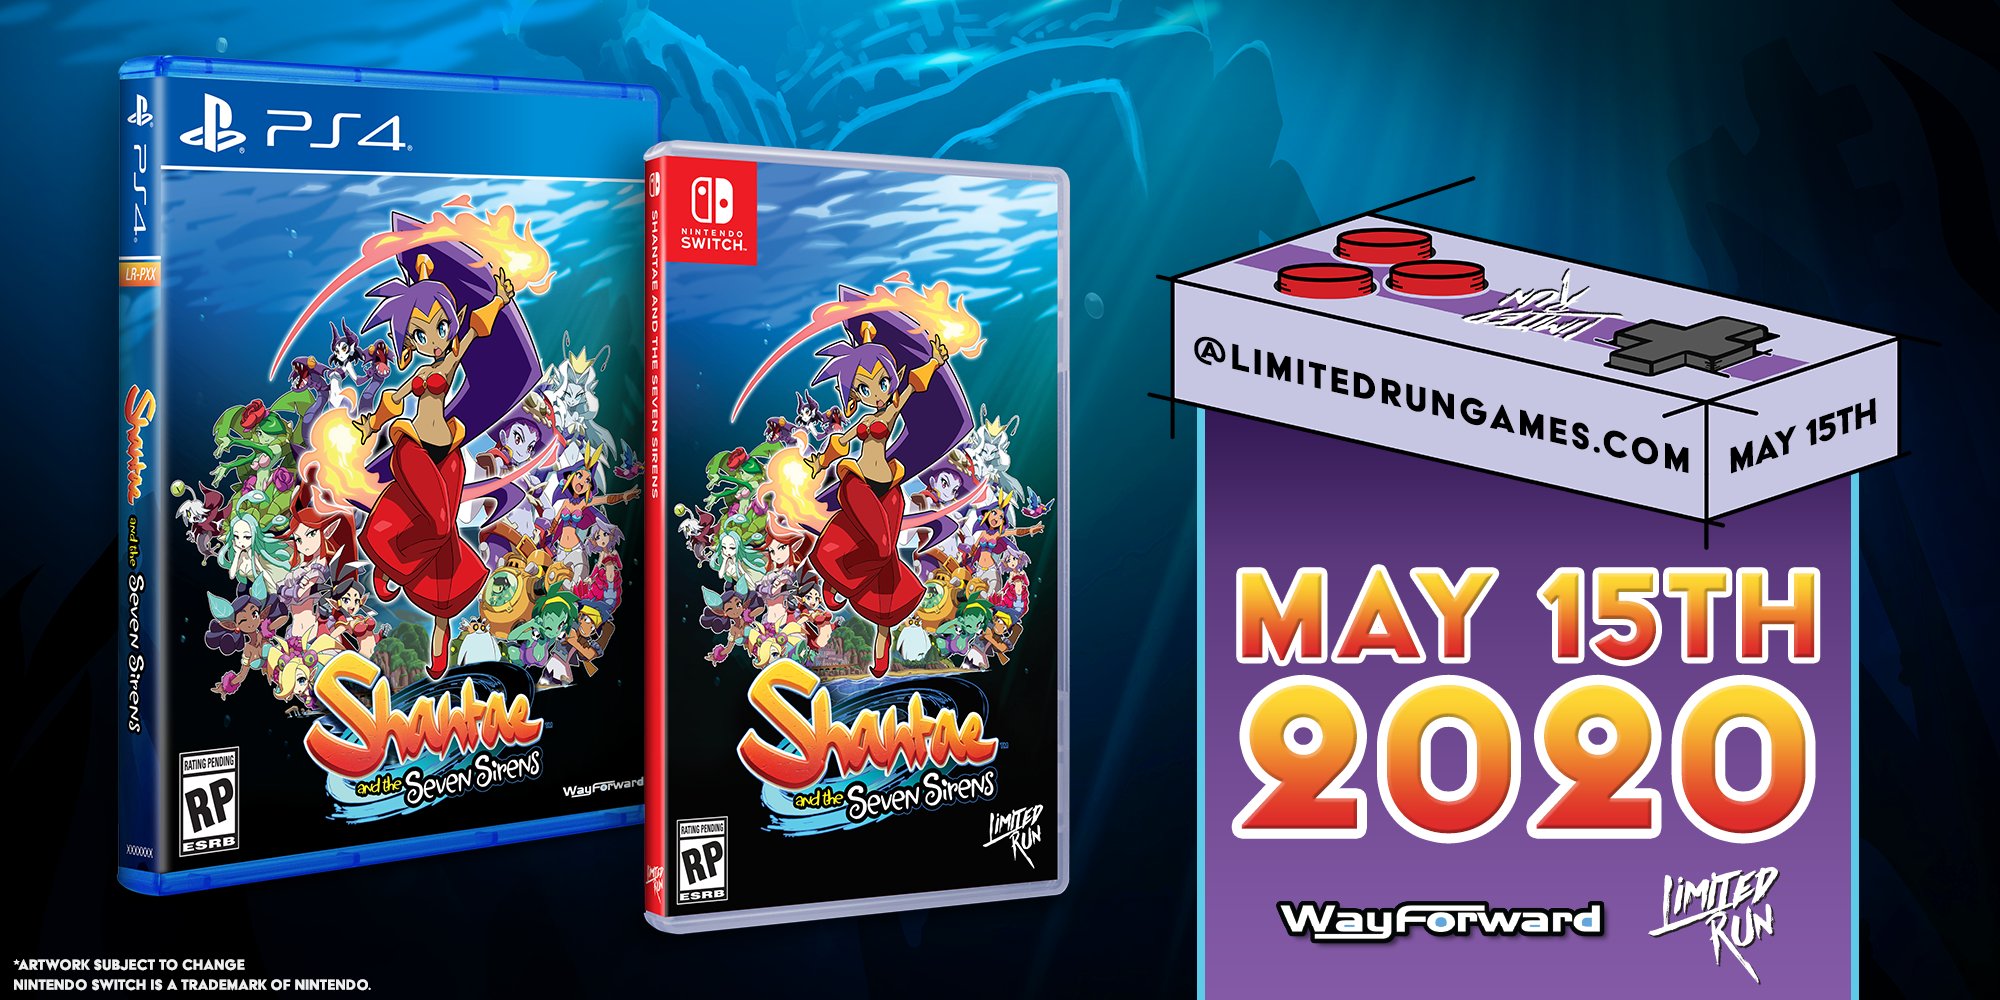 Limited Run Games reveals physical release for Shantae and the Seven Sirens